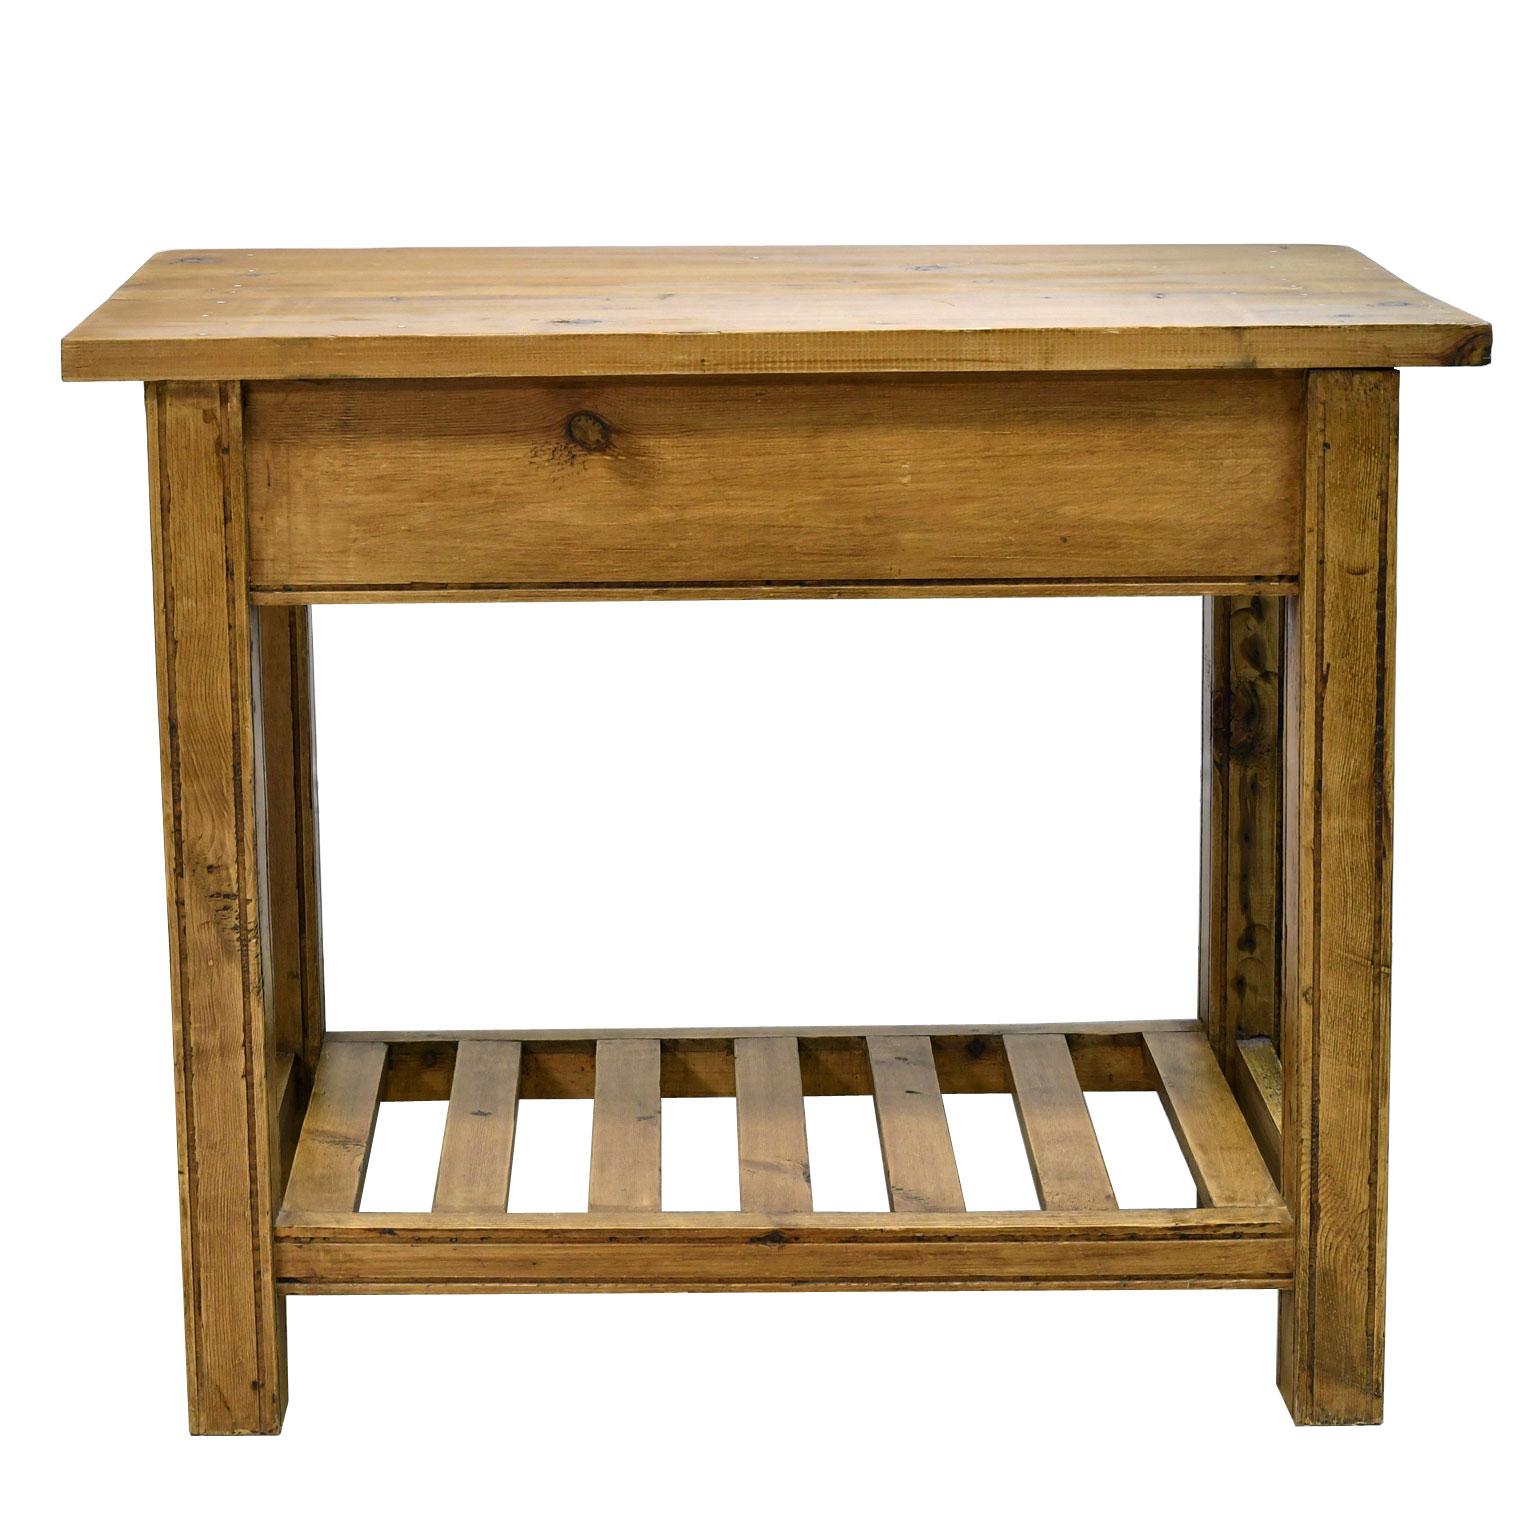 20th Century Vintage Rustic English Country-Style Table in Antique Pine For Sale